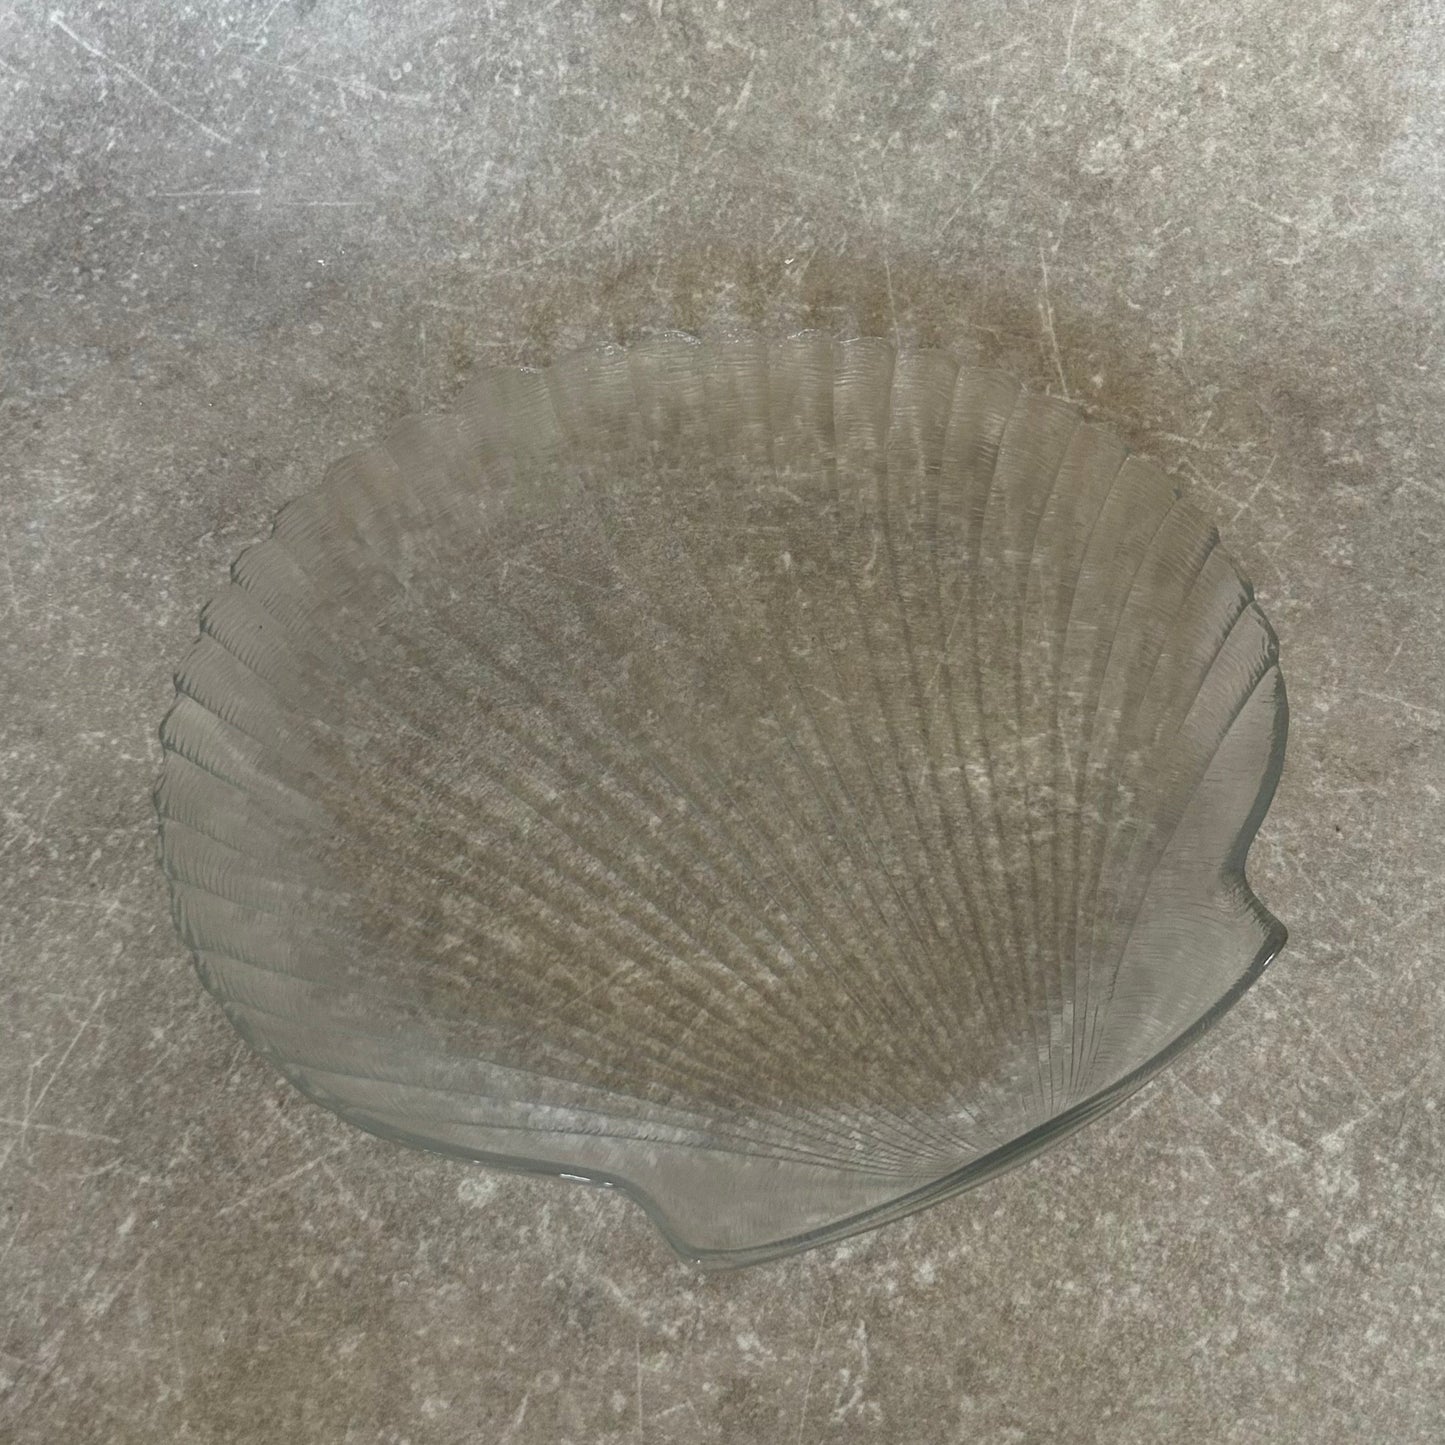 Large Vintage Glass Shell Dish